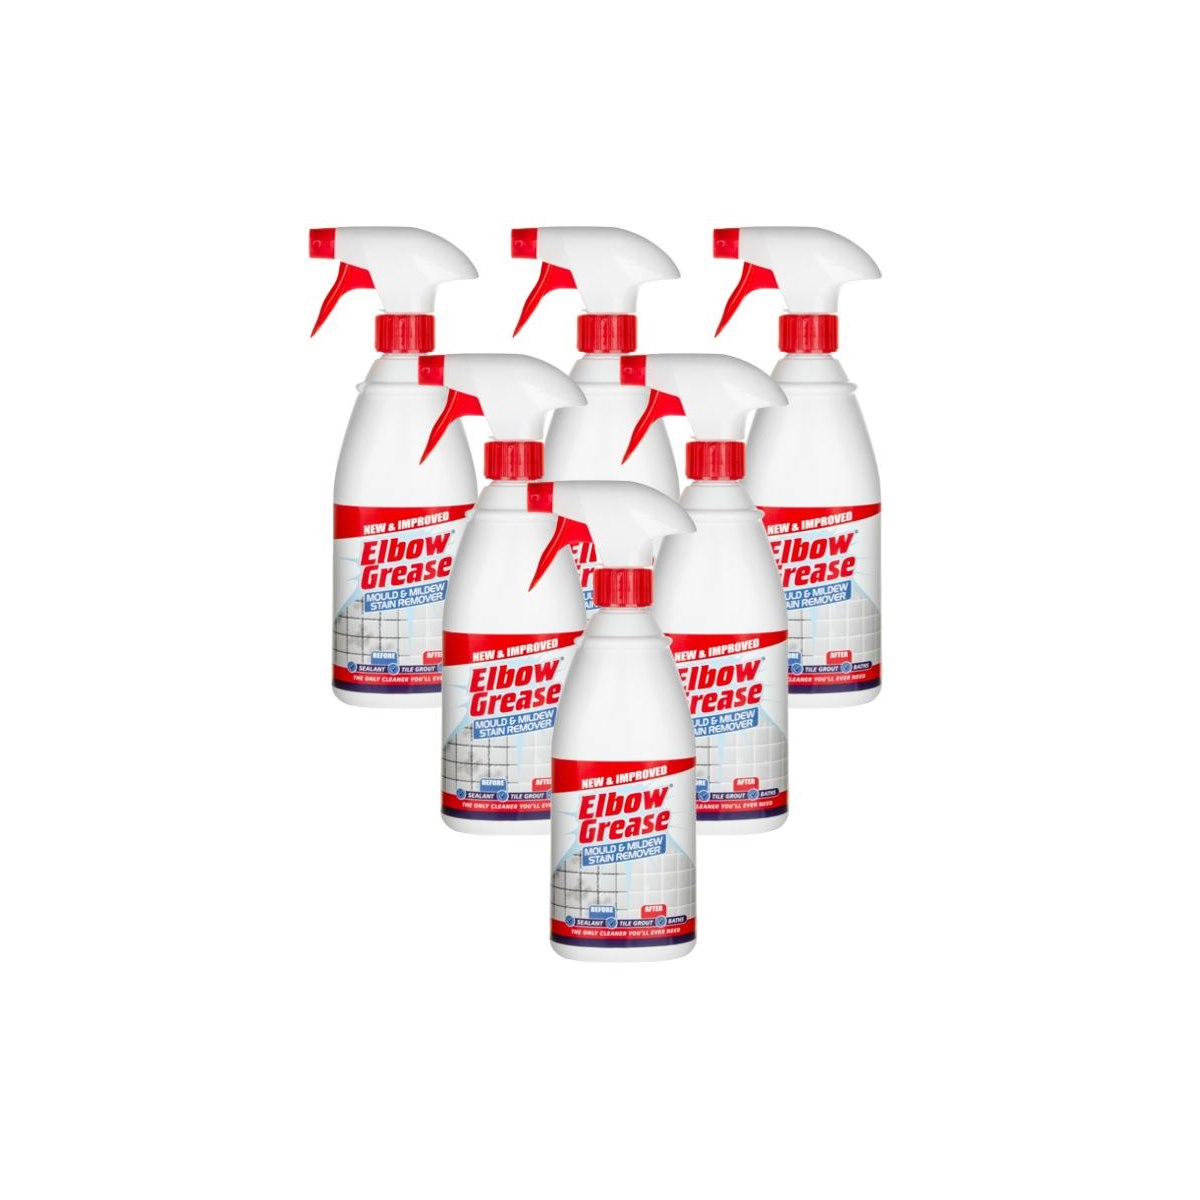 Case of 6 x Elbow Grease Mould and Mildew Stain Remover 1L